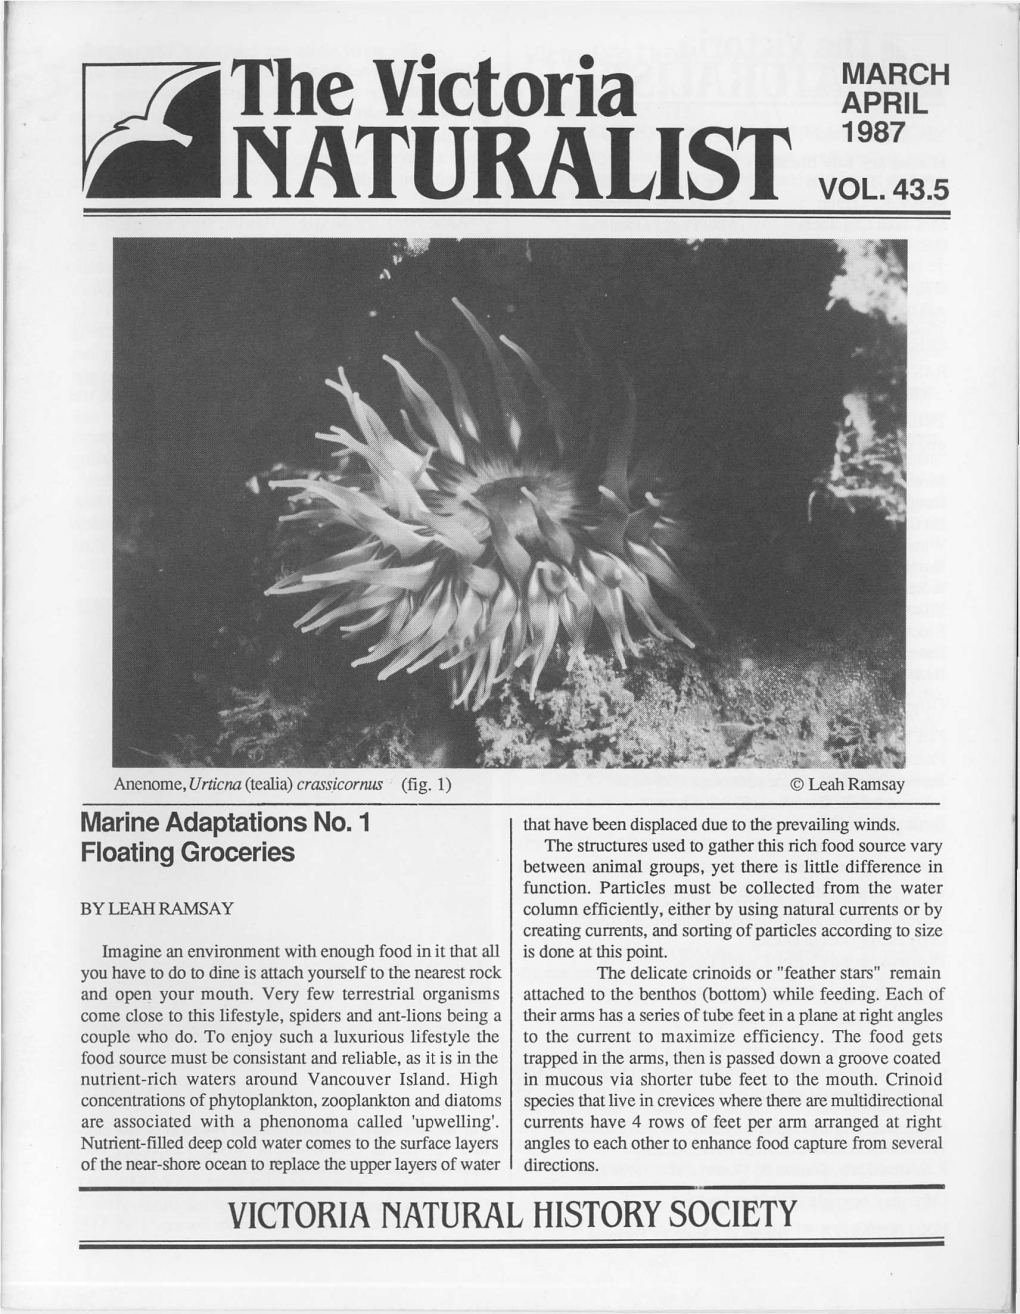 The Victoria Naturalist, Summer of 1986 Though, Changed Litis Perception